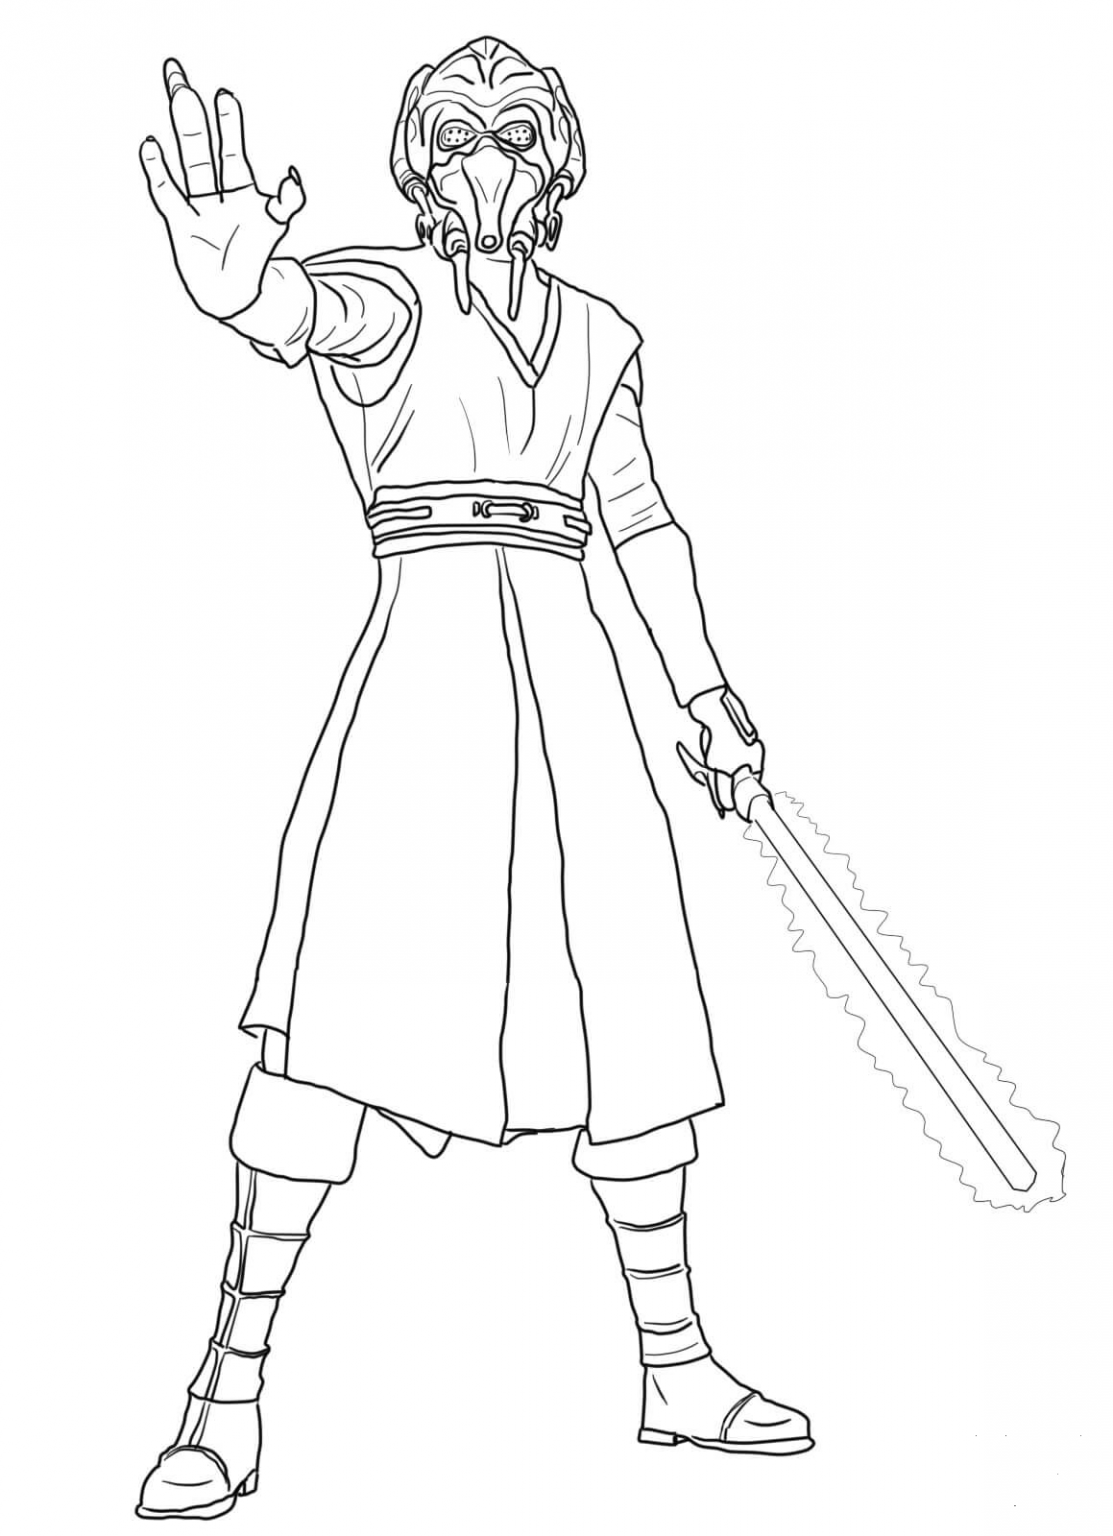 Plo Koon coloring page - ColouringPages